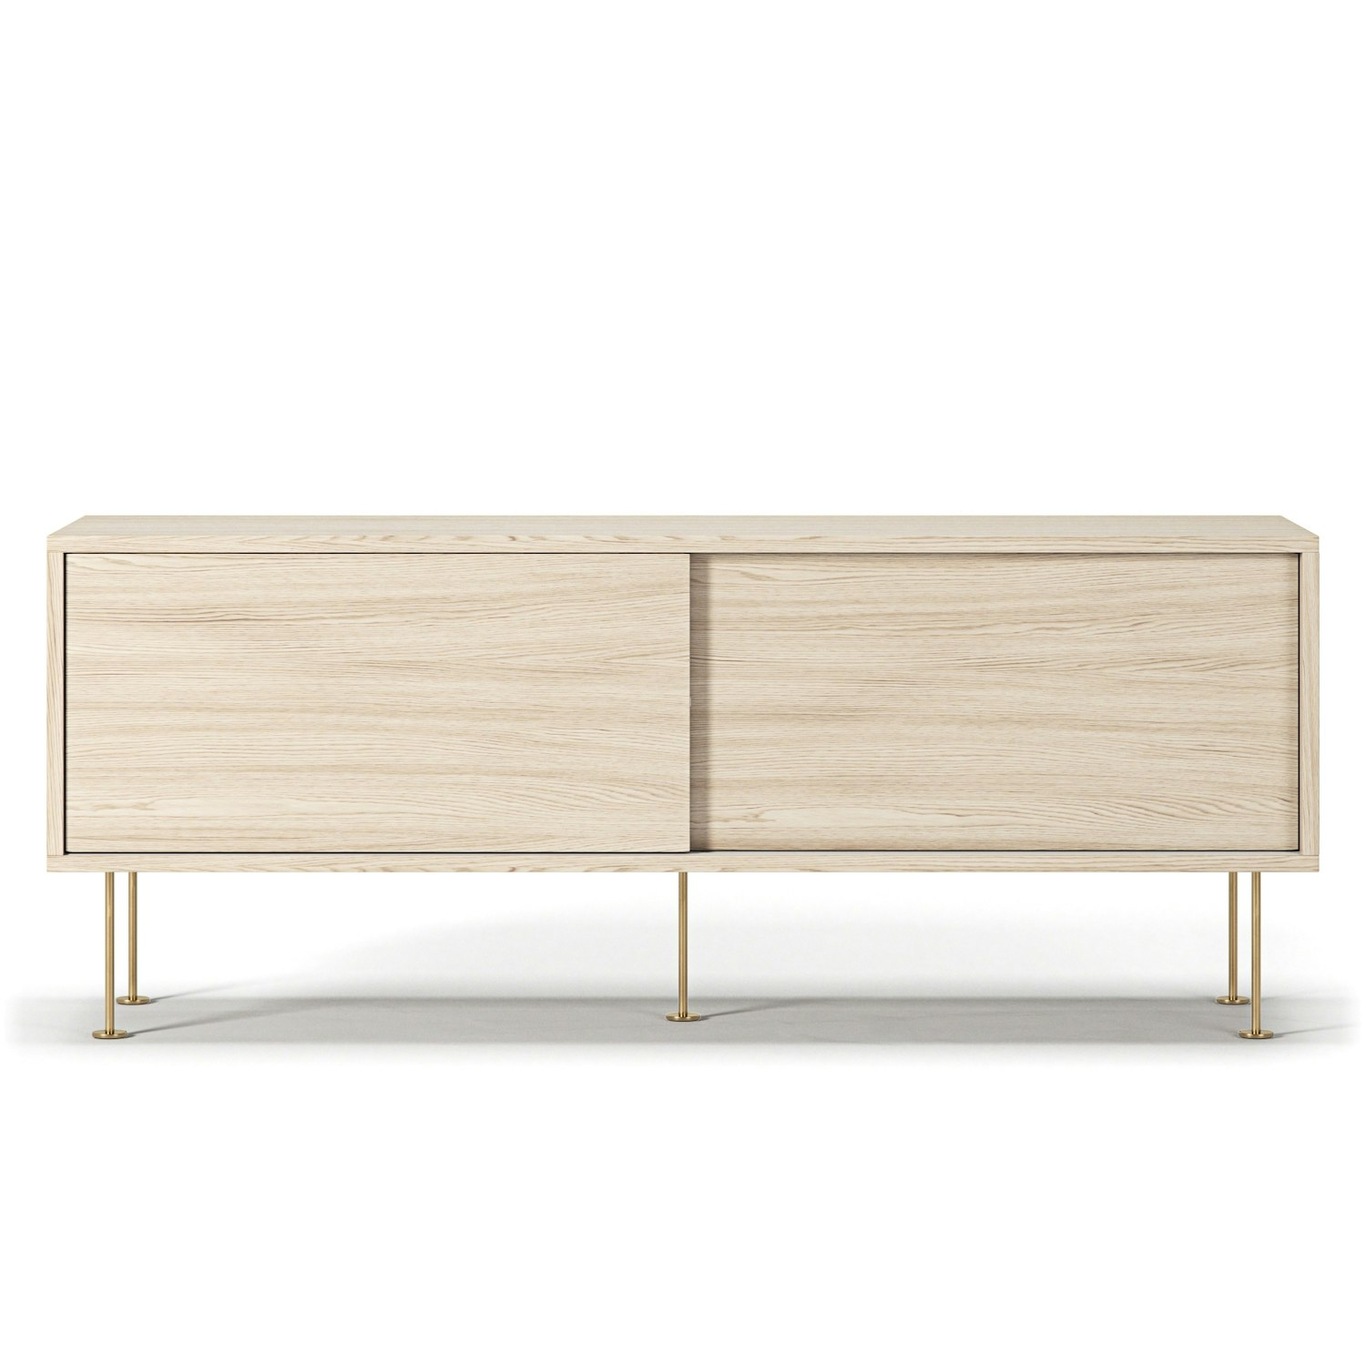 Vogue Media Bench With Legs 136 cm, White Pigmented Oak / Brass